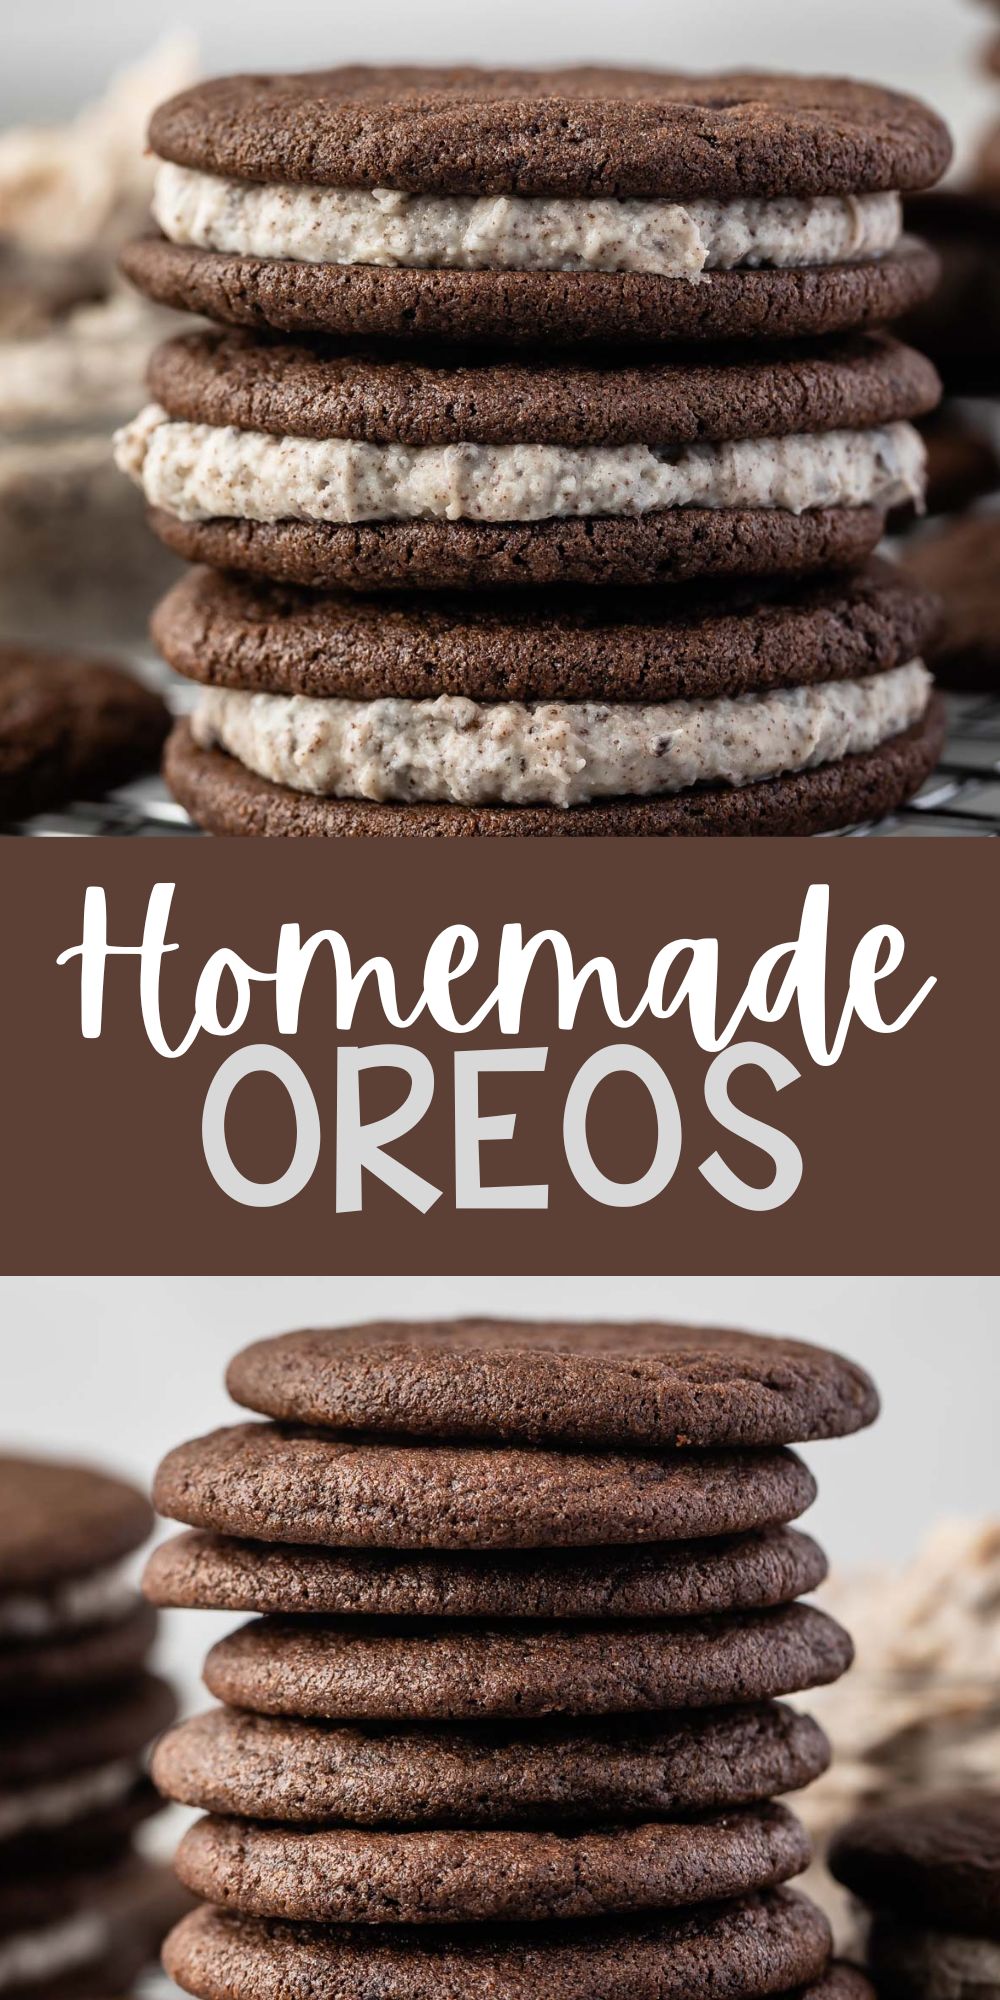 two photos of oreo cookies with cookies and cream filling with words on the image.